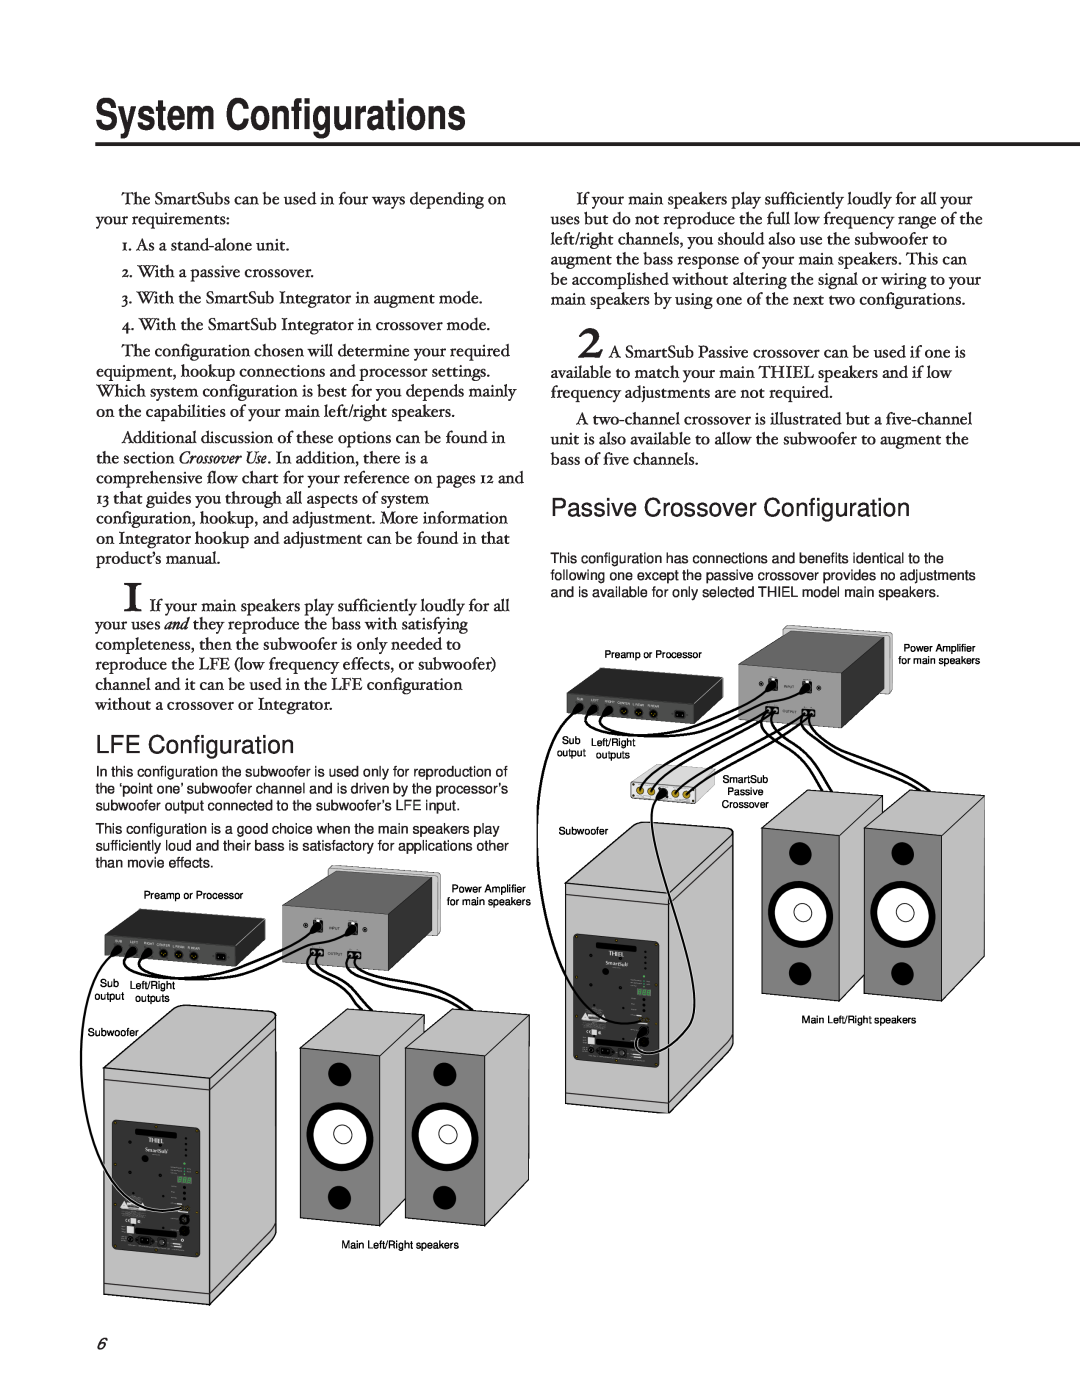 Thiel Audio Products SS4, SW1, SS3 manual System Configurations, Passive Crossover Configuration, LFE Configuration 